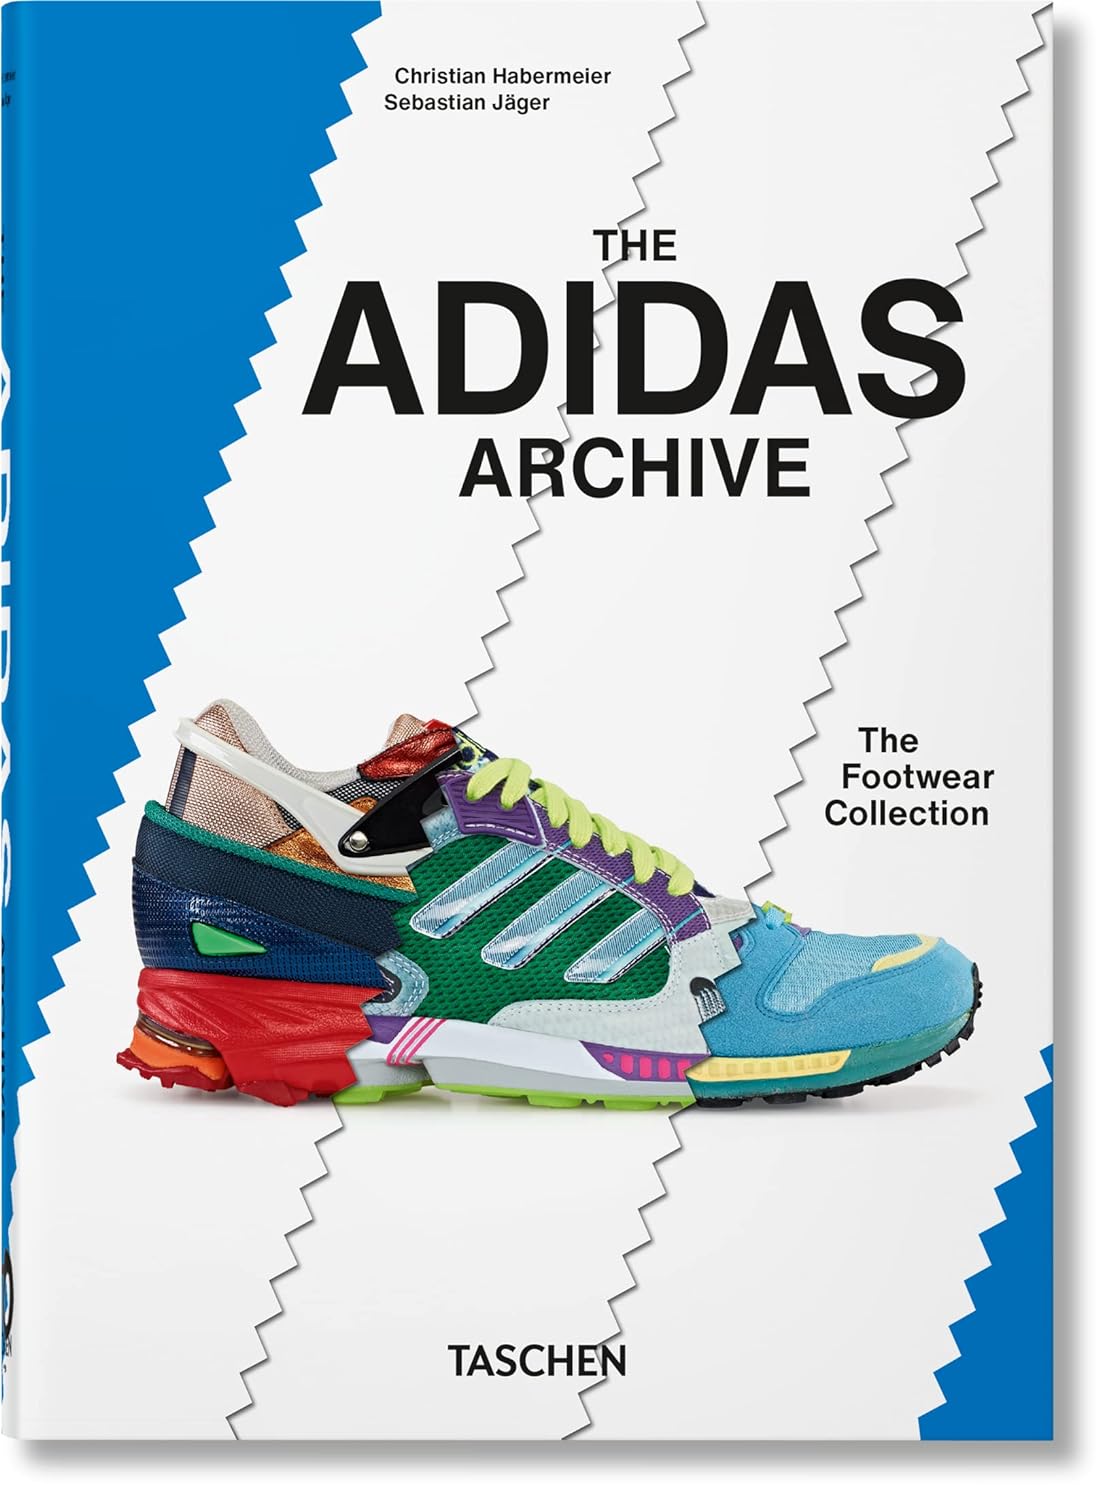 adidas 0020 92v The Adidas Archive. The Footwear Collection (40th Anniversary Edition)